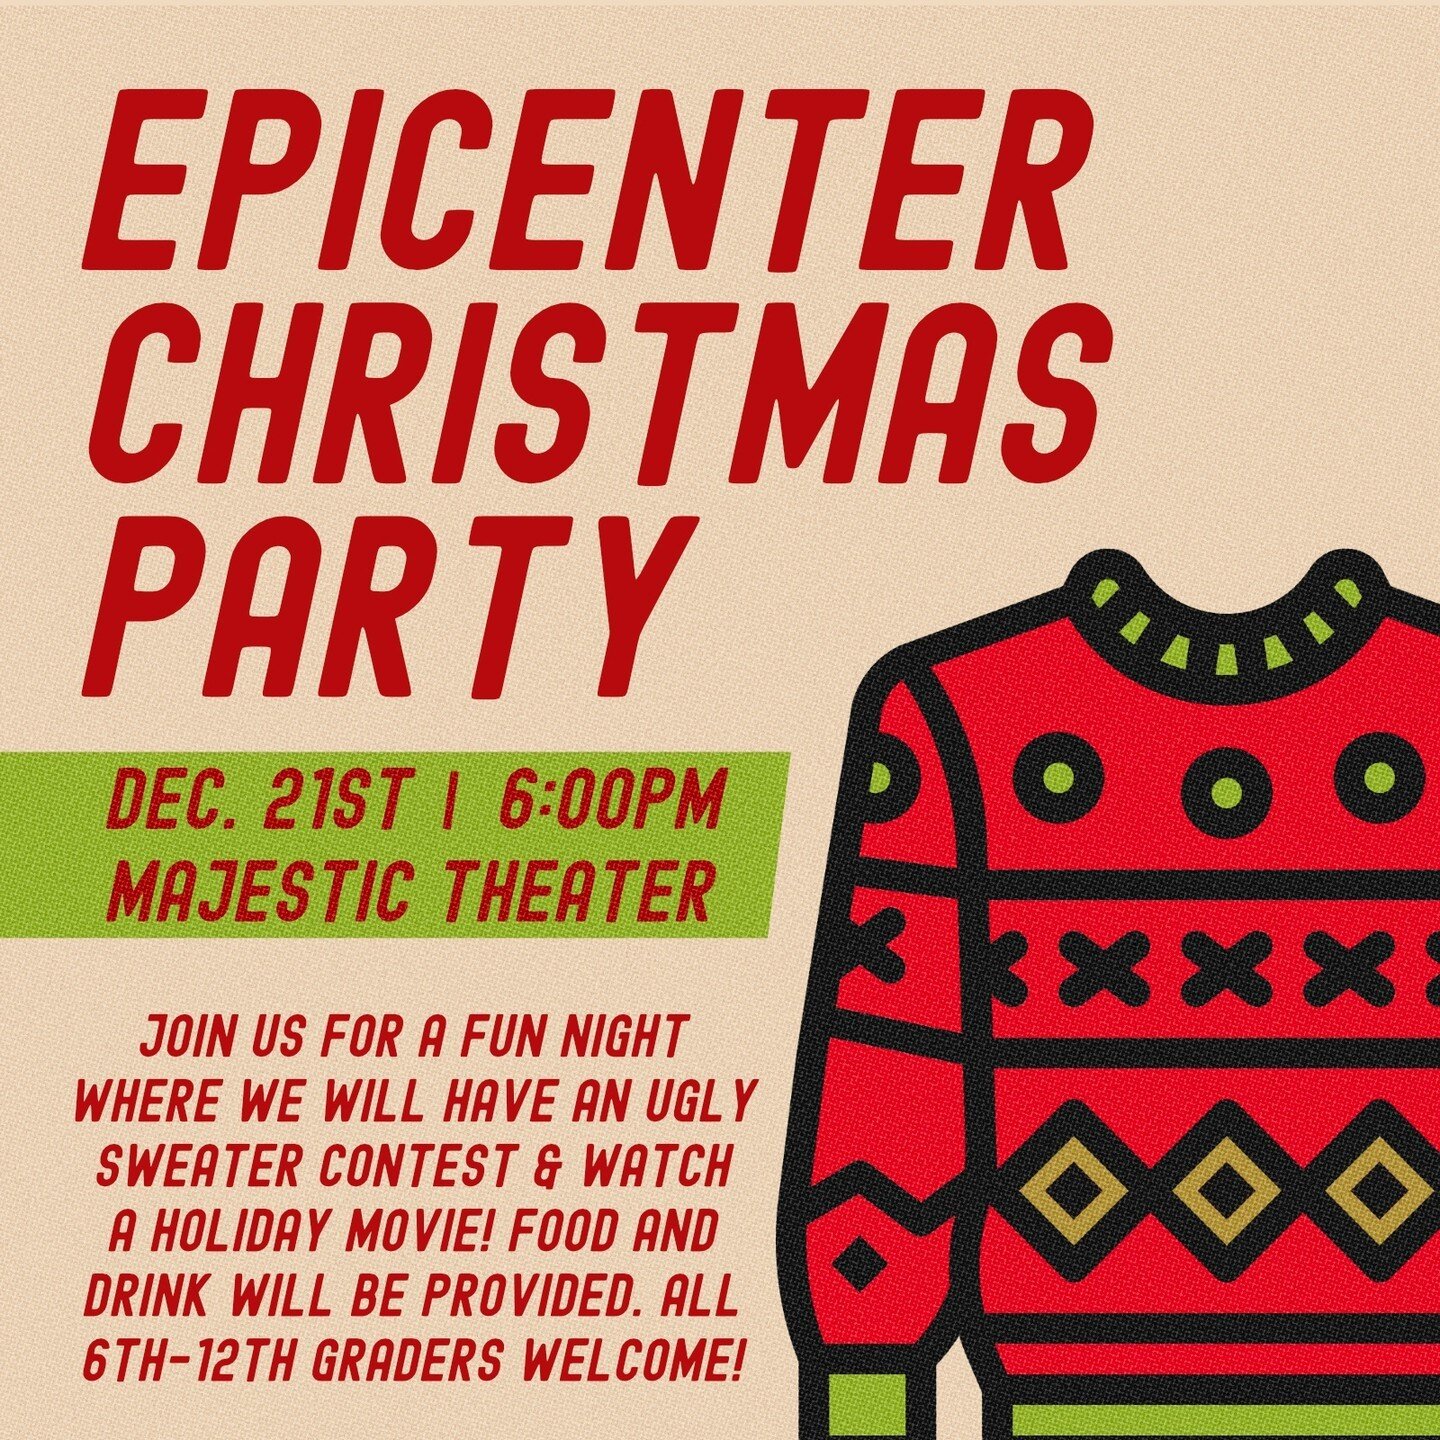 REMINDER! Tomorrow night is our Epicenter youth Christmas Party! Wear your favorite ugly sweater and join us as we watch a holiday movie! All 5th-12th graders are welcome! We hope to see you there!